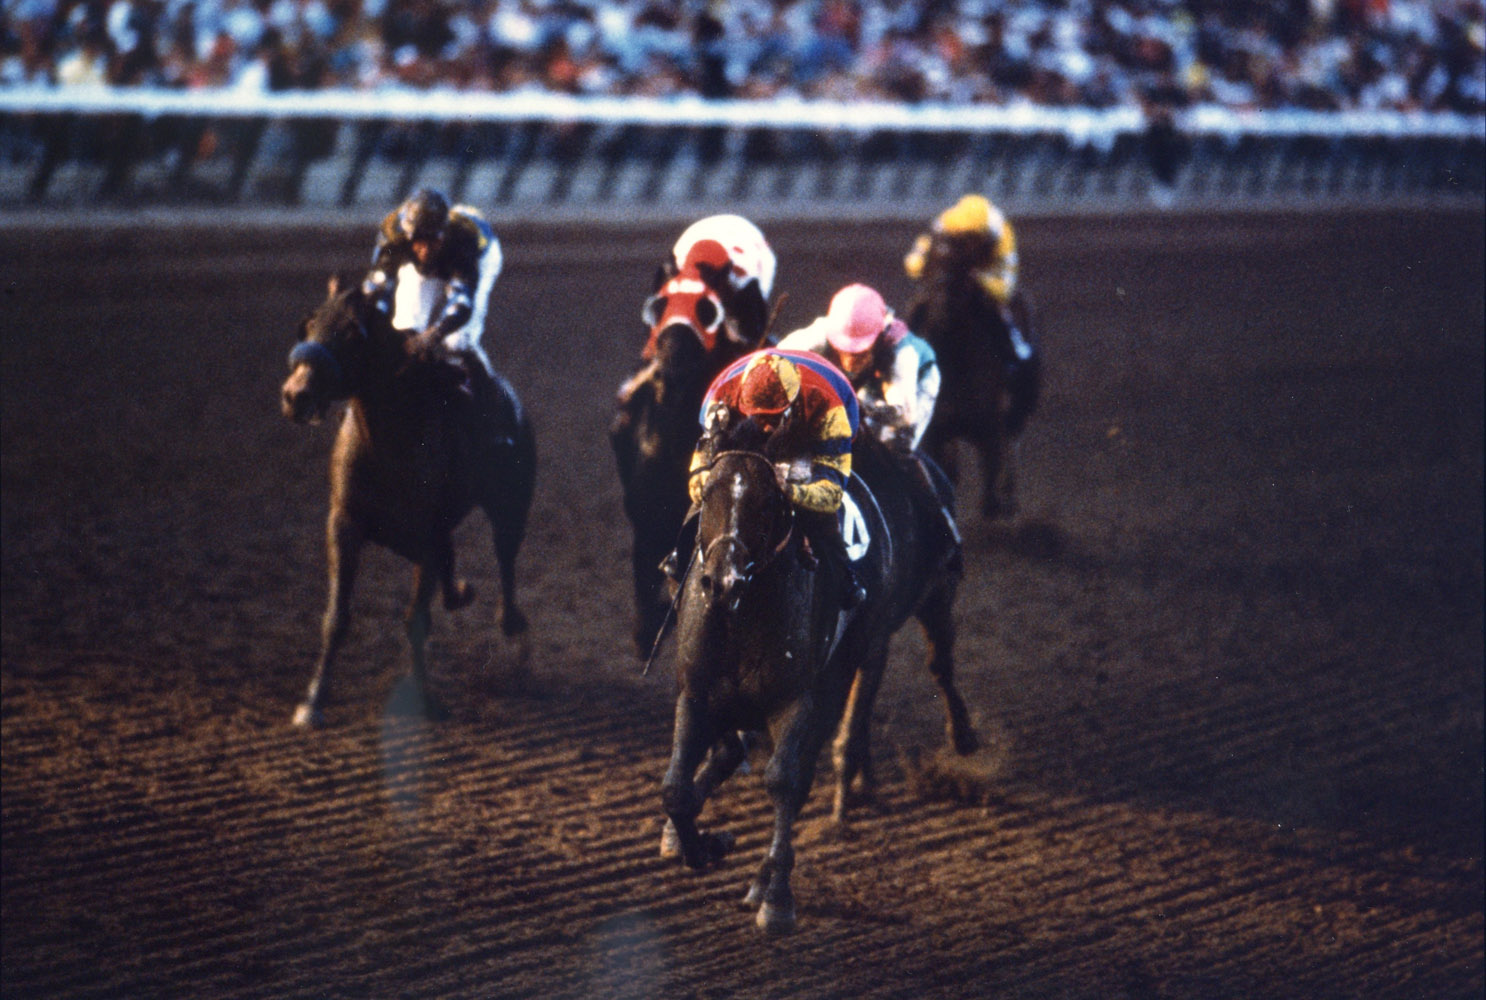 A.P. Indy (Eddie Delahoussaye up) turning for home in the 1992 Breeders' Cup Classic (Breeders' Cup Photo/Museum Collection)